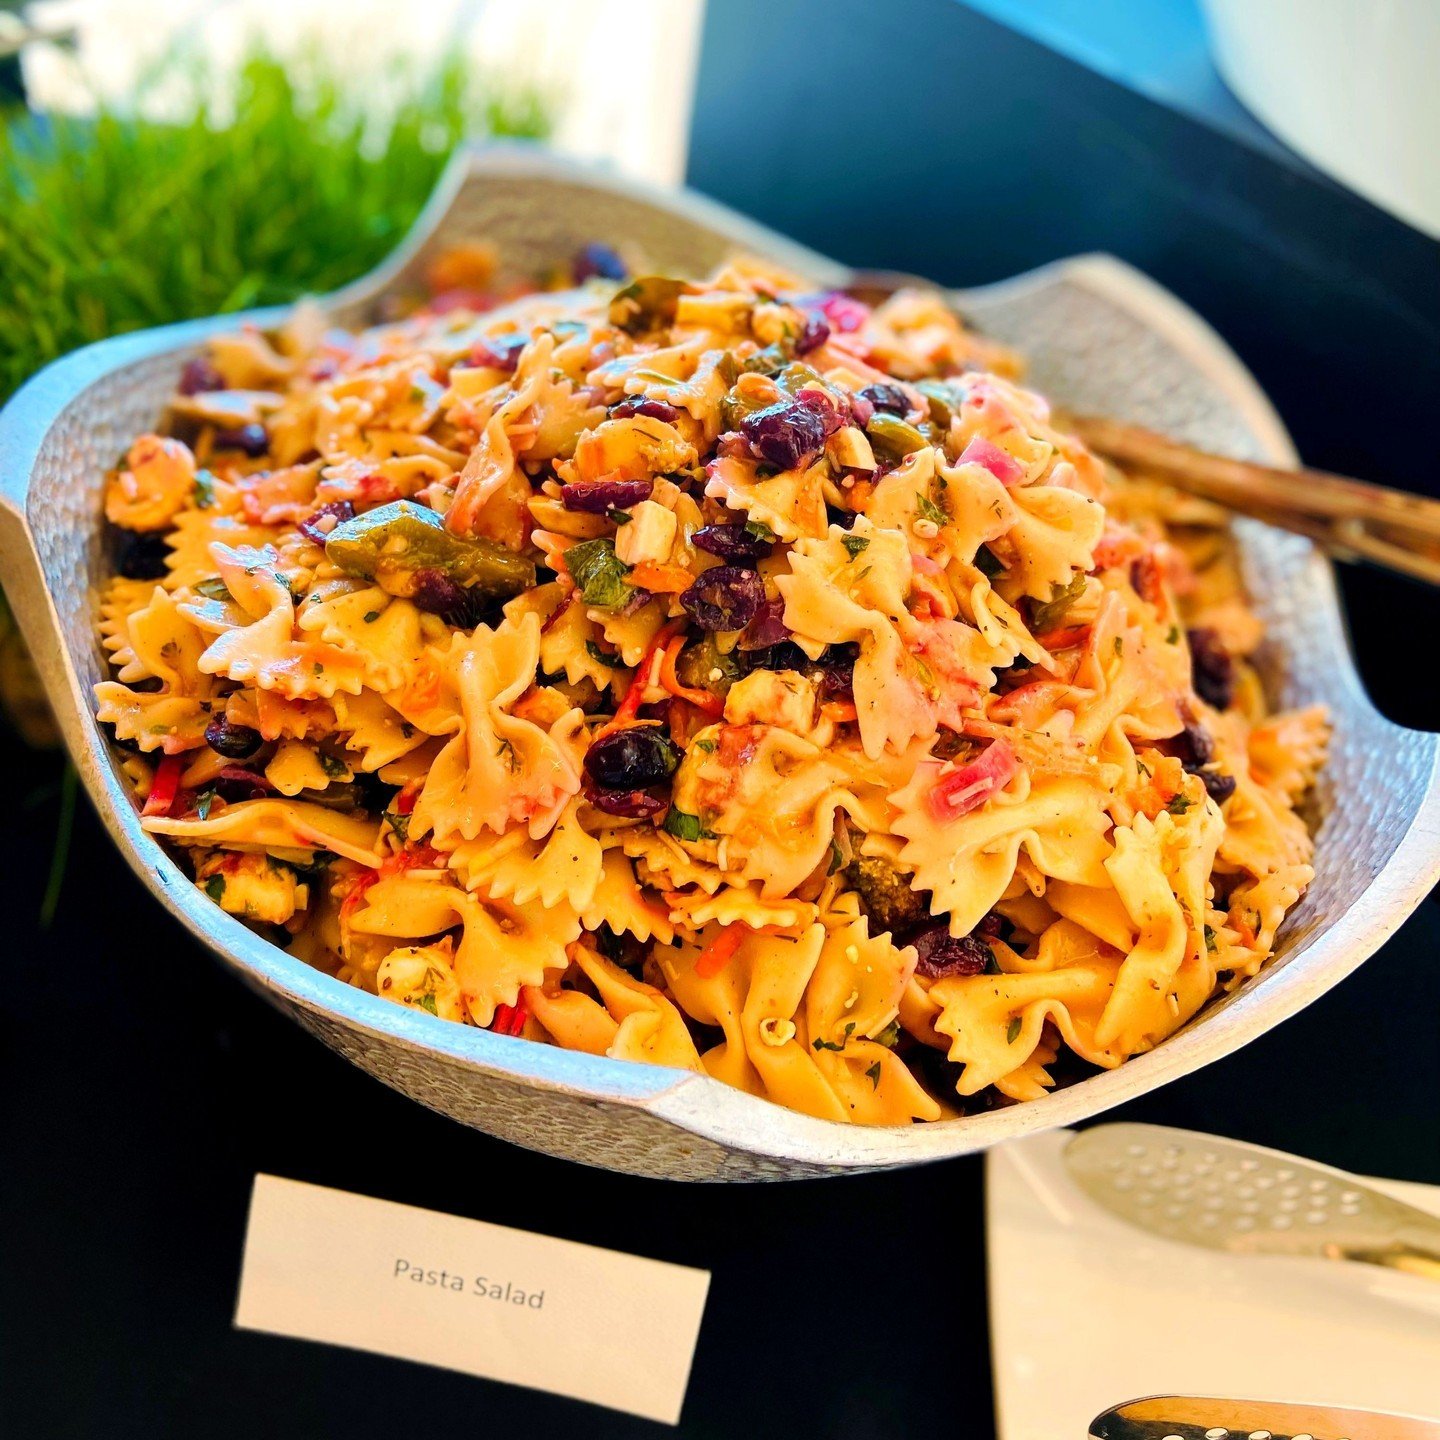 Indulge your senses with a bowl of Italian yumminess! This pasta salad will fill your tummy and leave you wanting more. 🍝